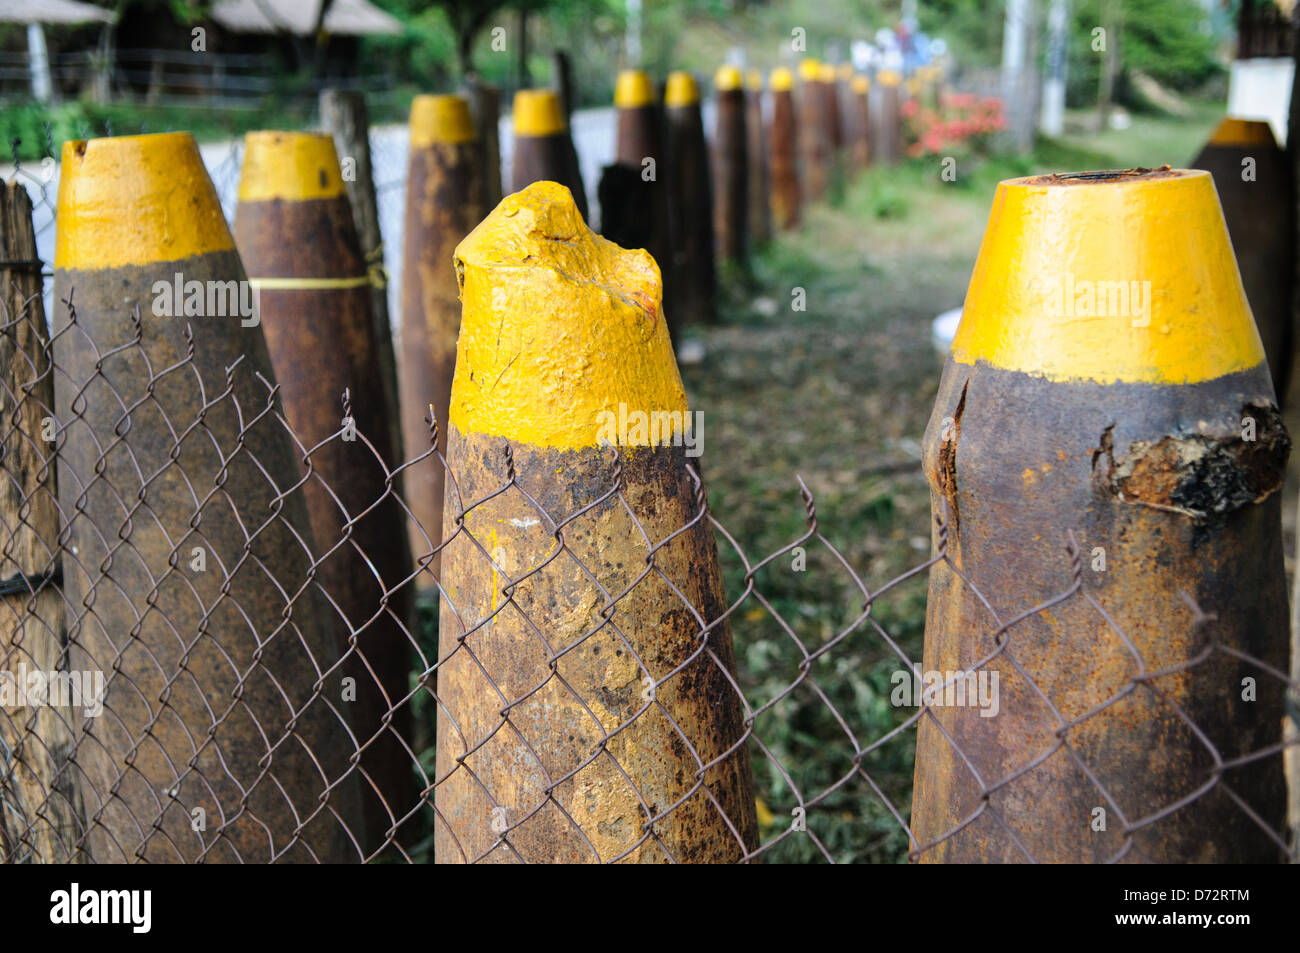 Unexploded munitions left over from the Vietnam War are used in a fence in a village in the Plain of Jars, Laos, known as Bomb Village. Stock Photo